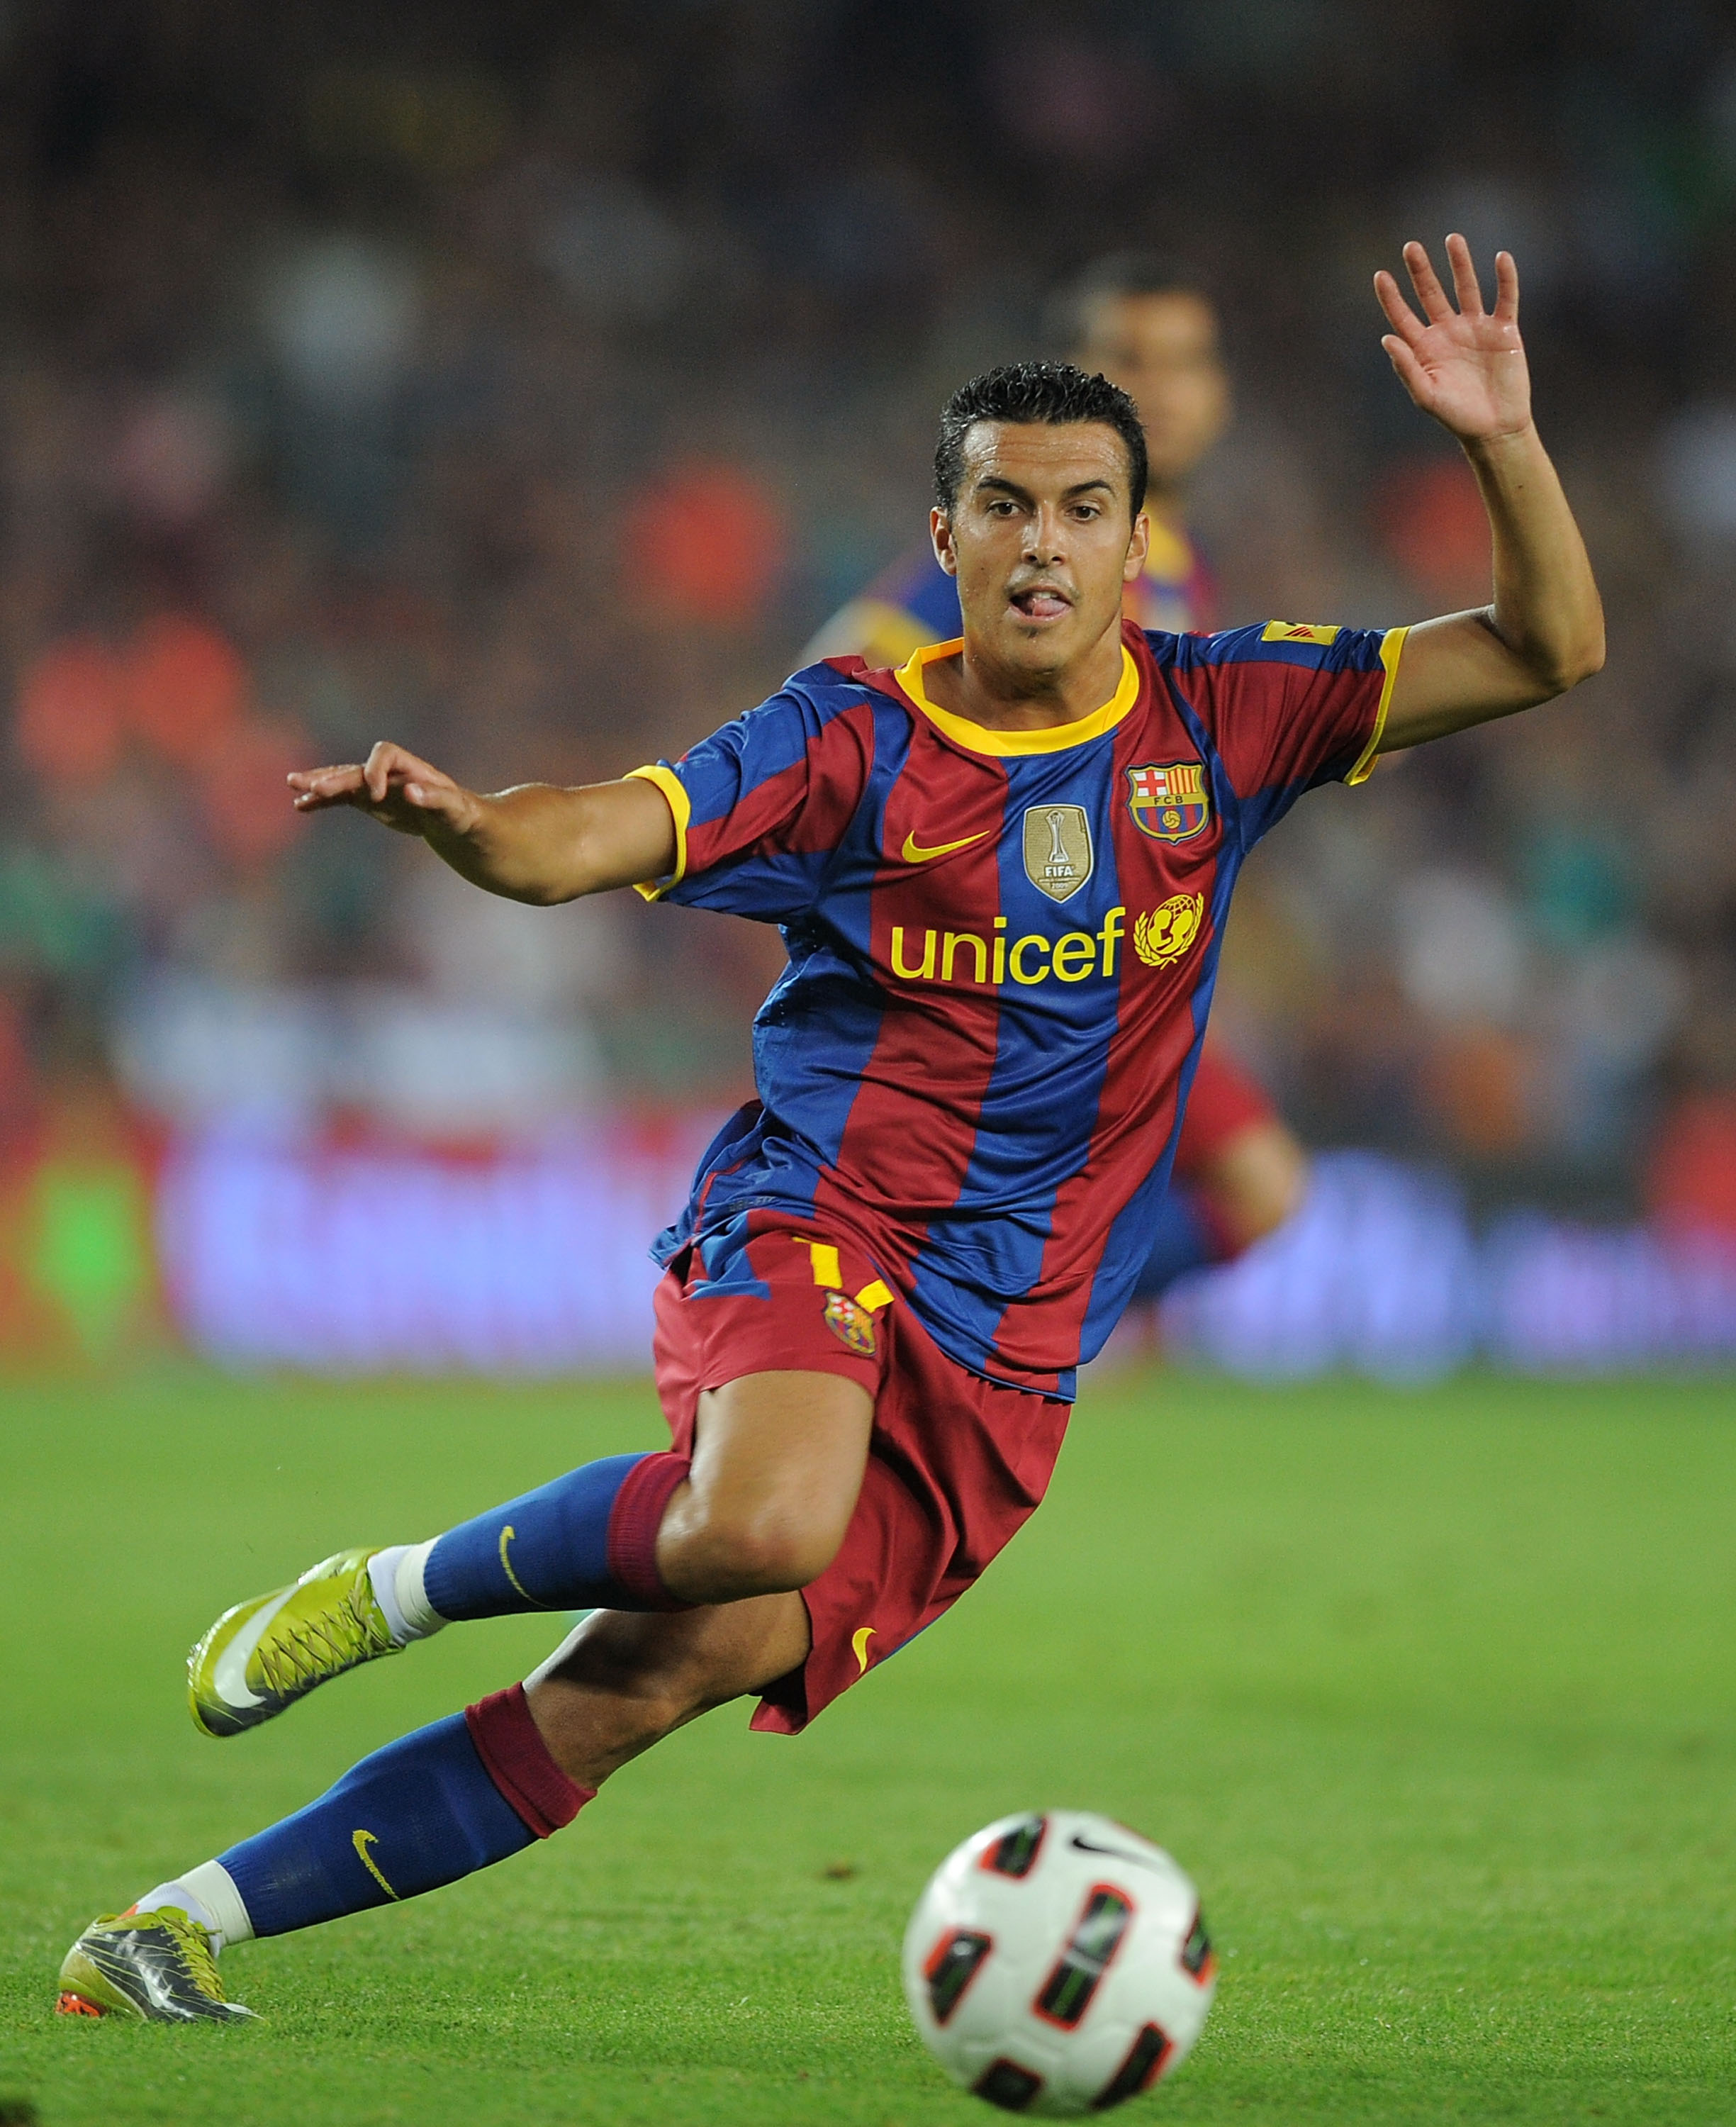 BARCELONA, SPAIN - AUGUST 25:  Pedro Rodriguez of Barcelona in action during the Joan Gamper Trophy match between Barcelona and AC Milan at Camp Nou stadium on August 25, 2010 in Barcelona, Spain.  (Photo by Denis Doyle/Getty Images)